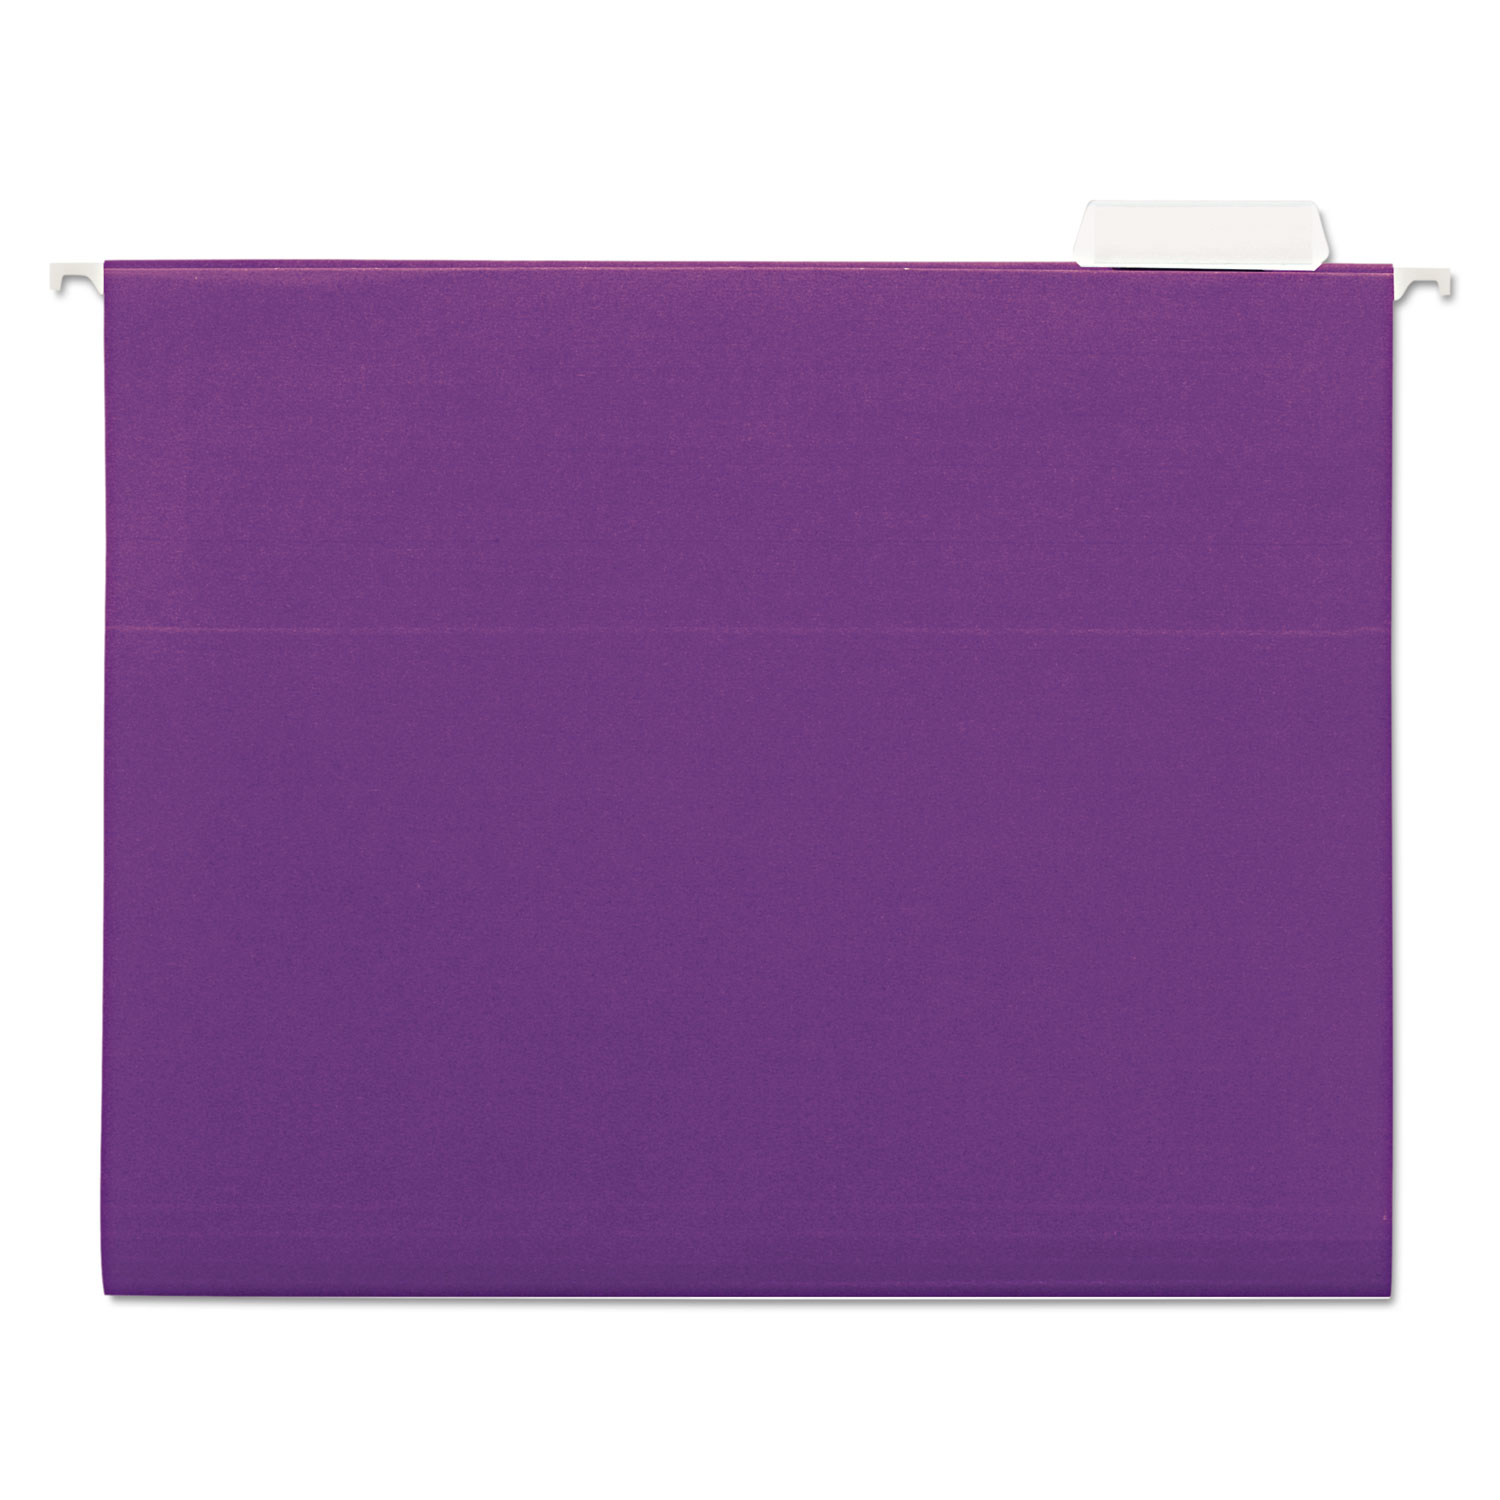  Universal UNV14120EE Deluxe Bright Color Hanging File Folders, Letter Size, 1/5-Cut Tab, Violet, 25/Box (UNV14120) 